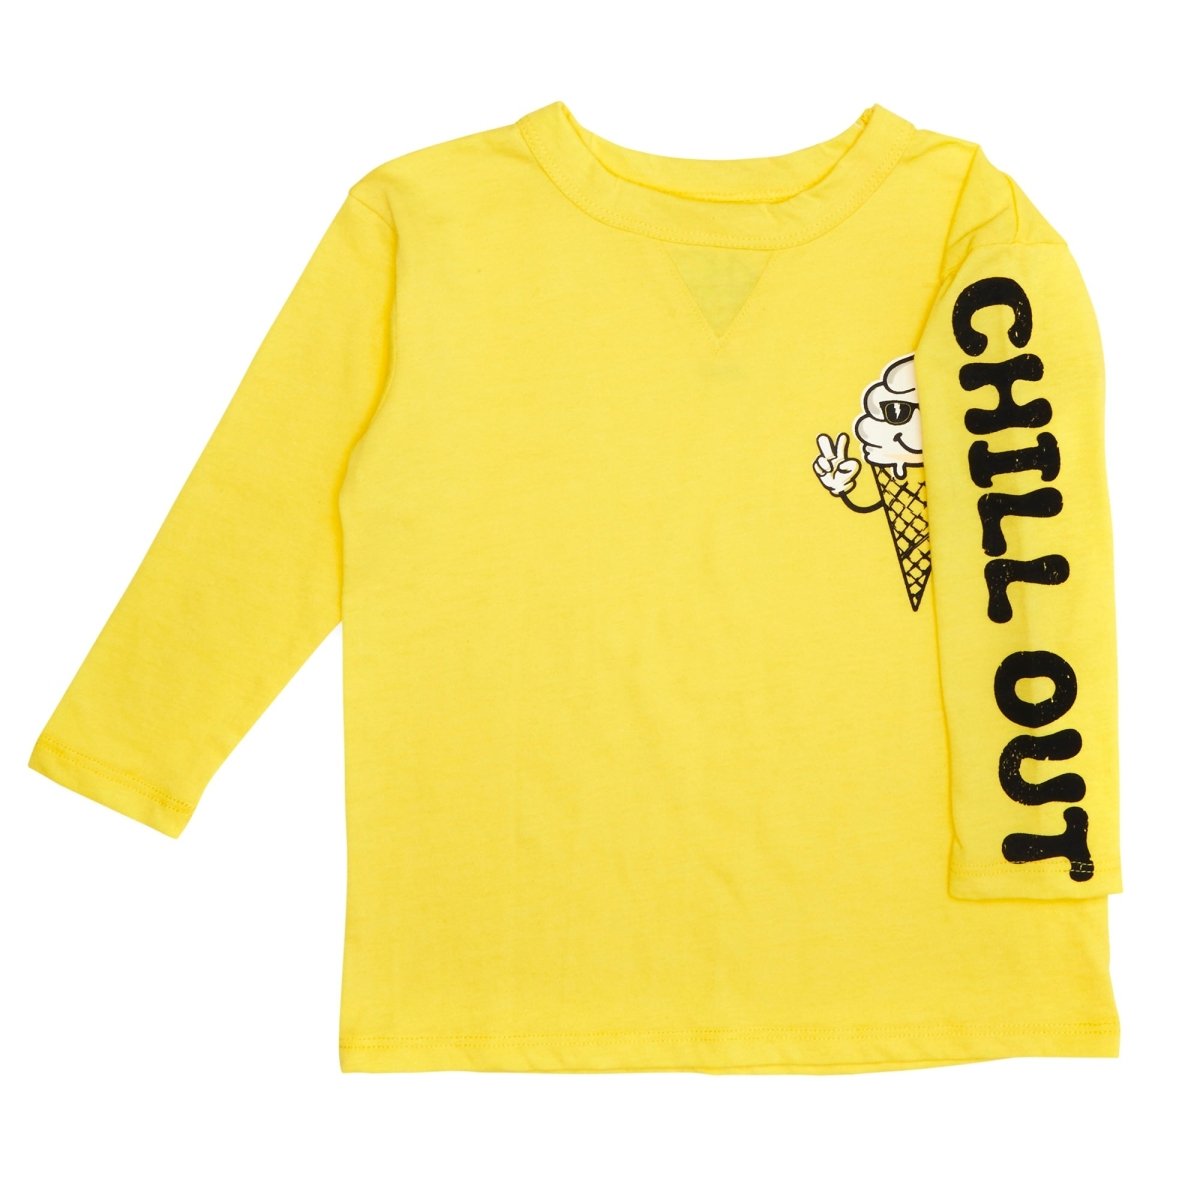 CHILL OUT LONG SLEEVE TSHIRT - CHASER KIDS